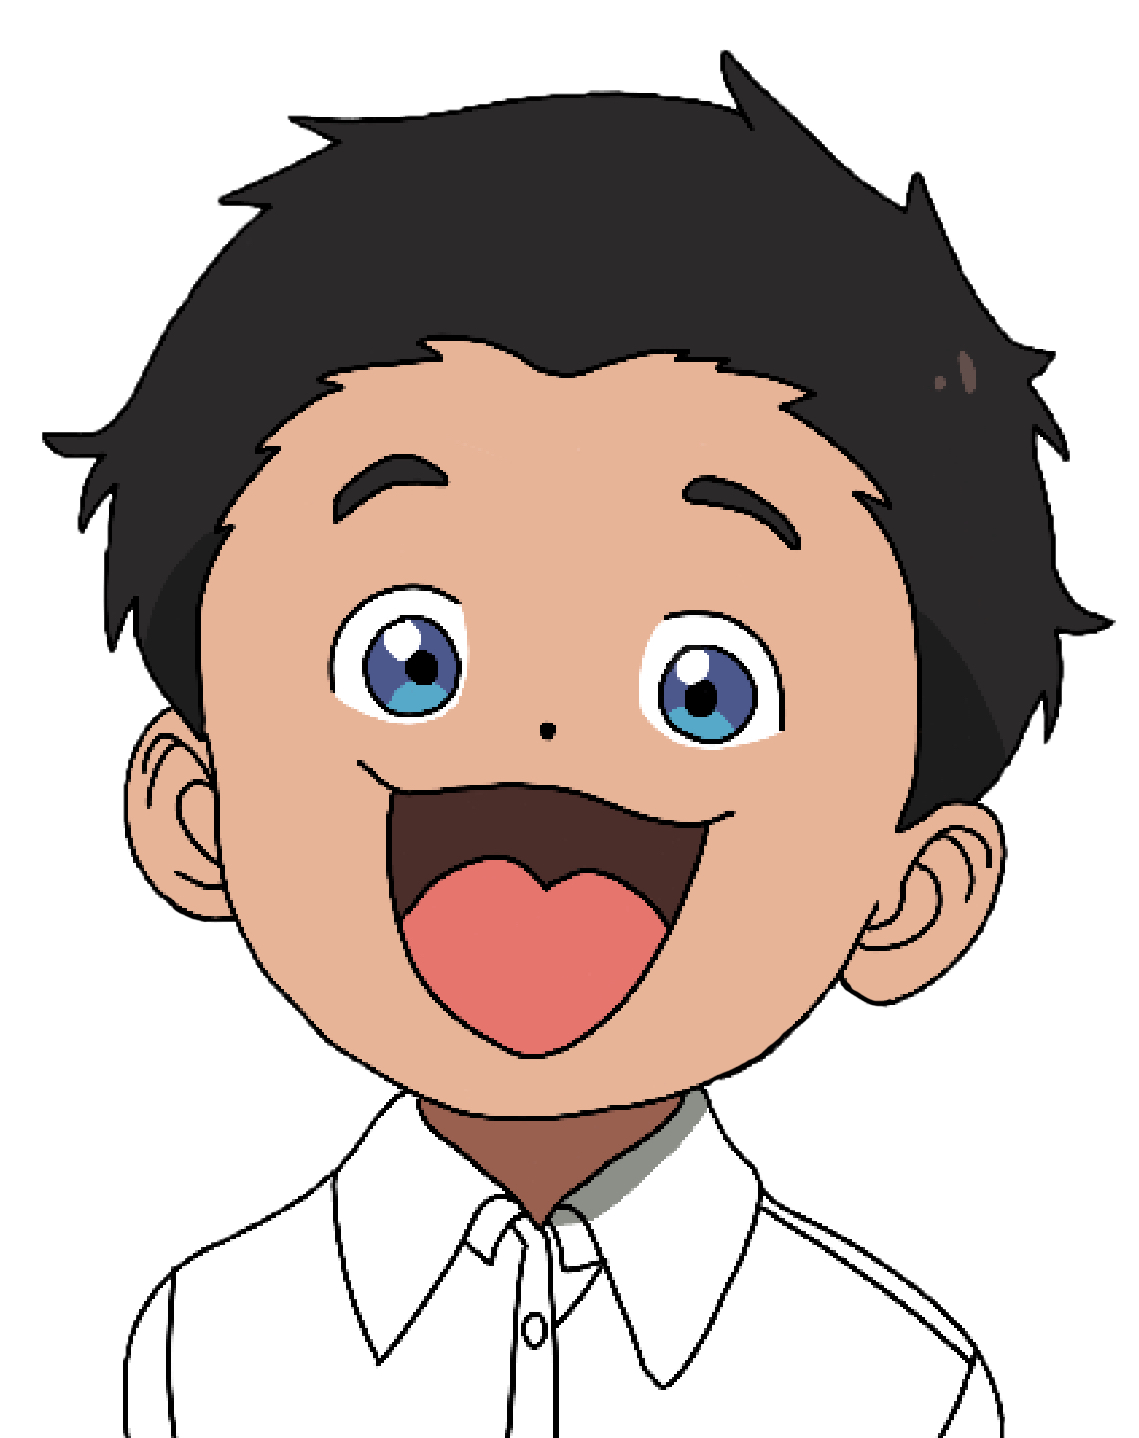 List of The Promised Neverland characters - Wikipedia